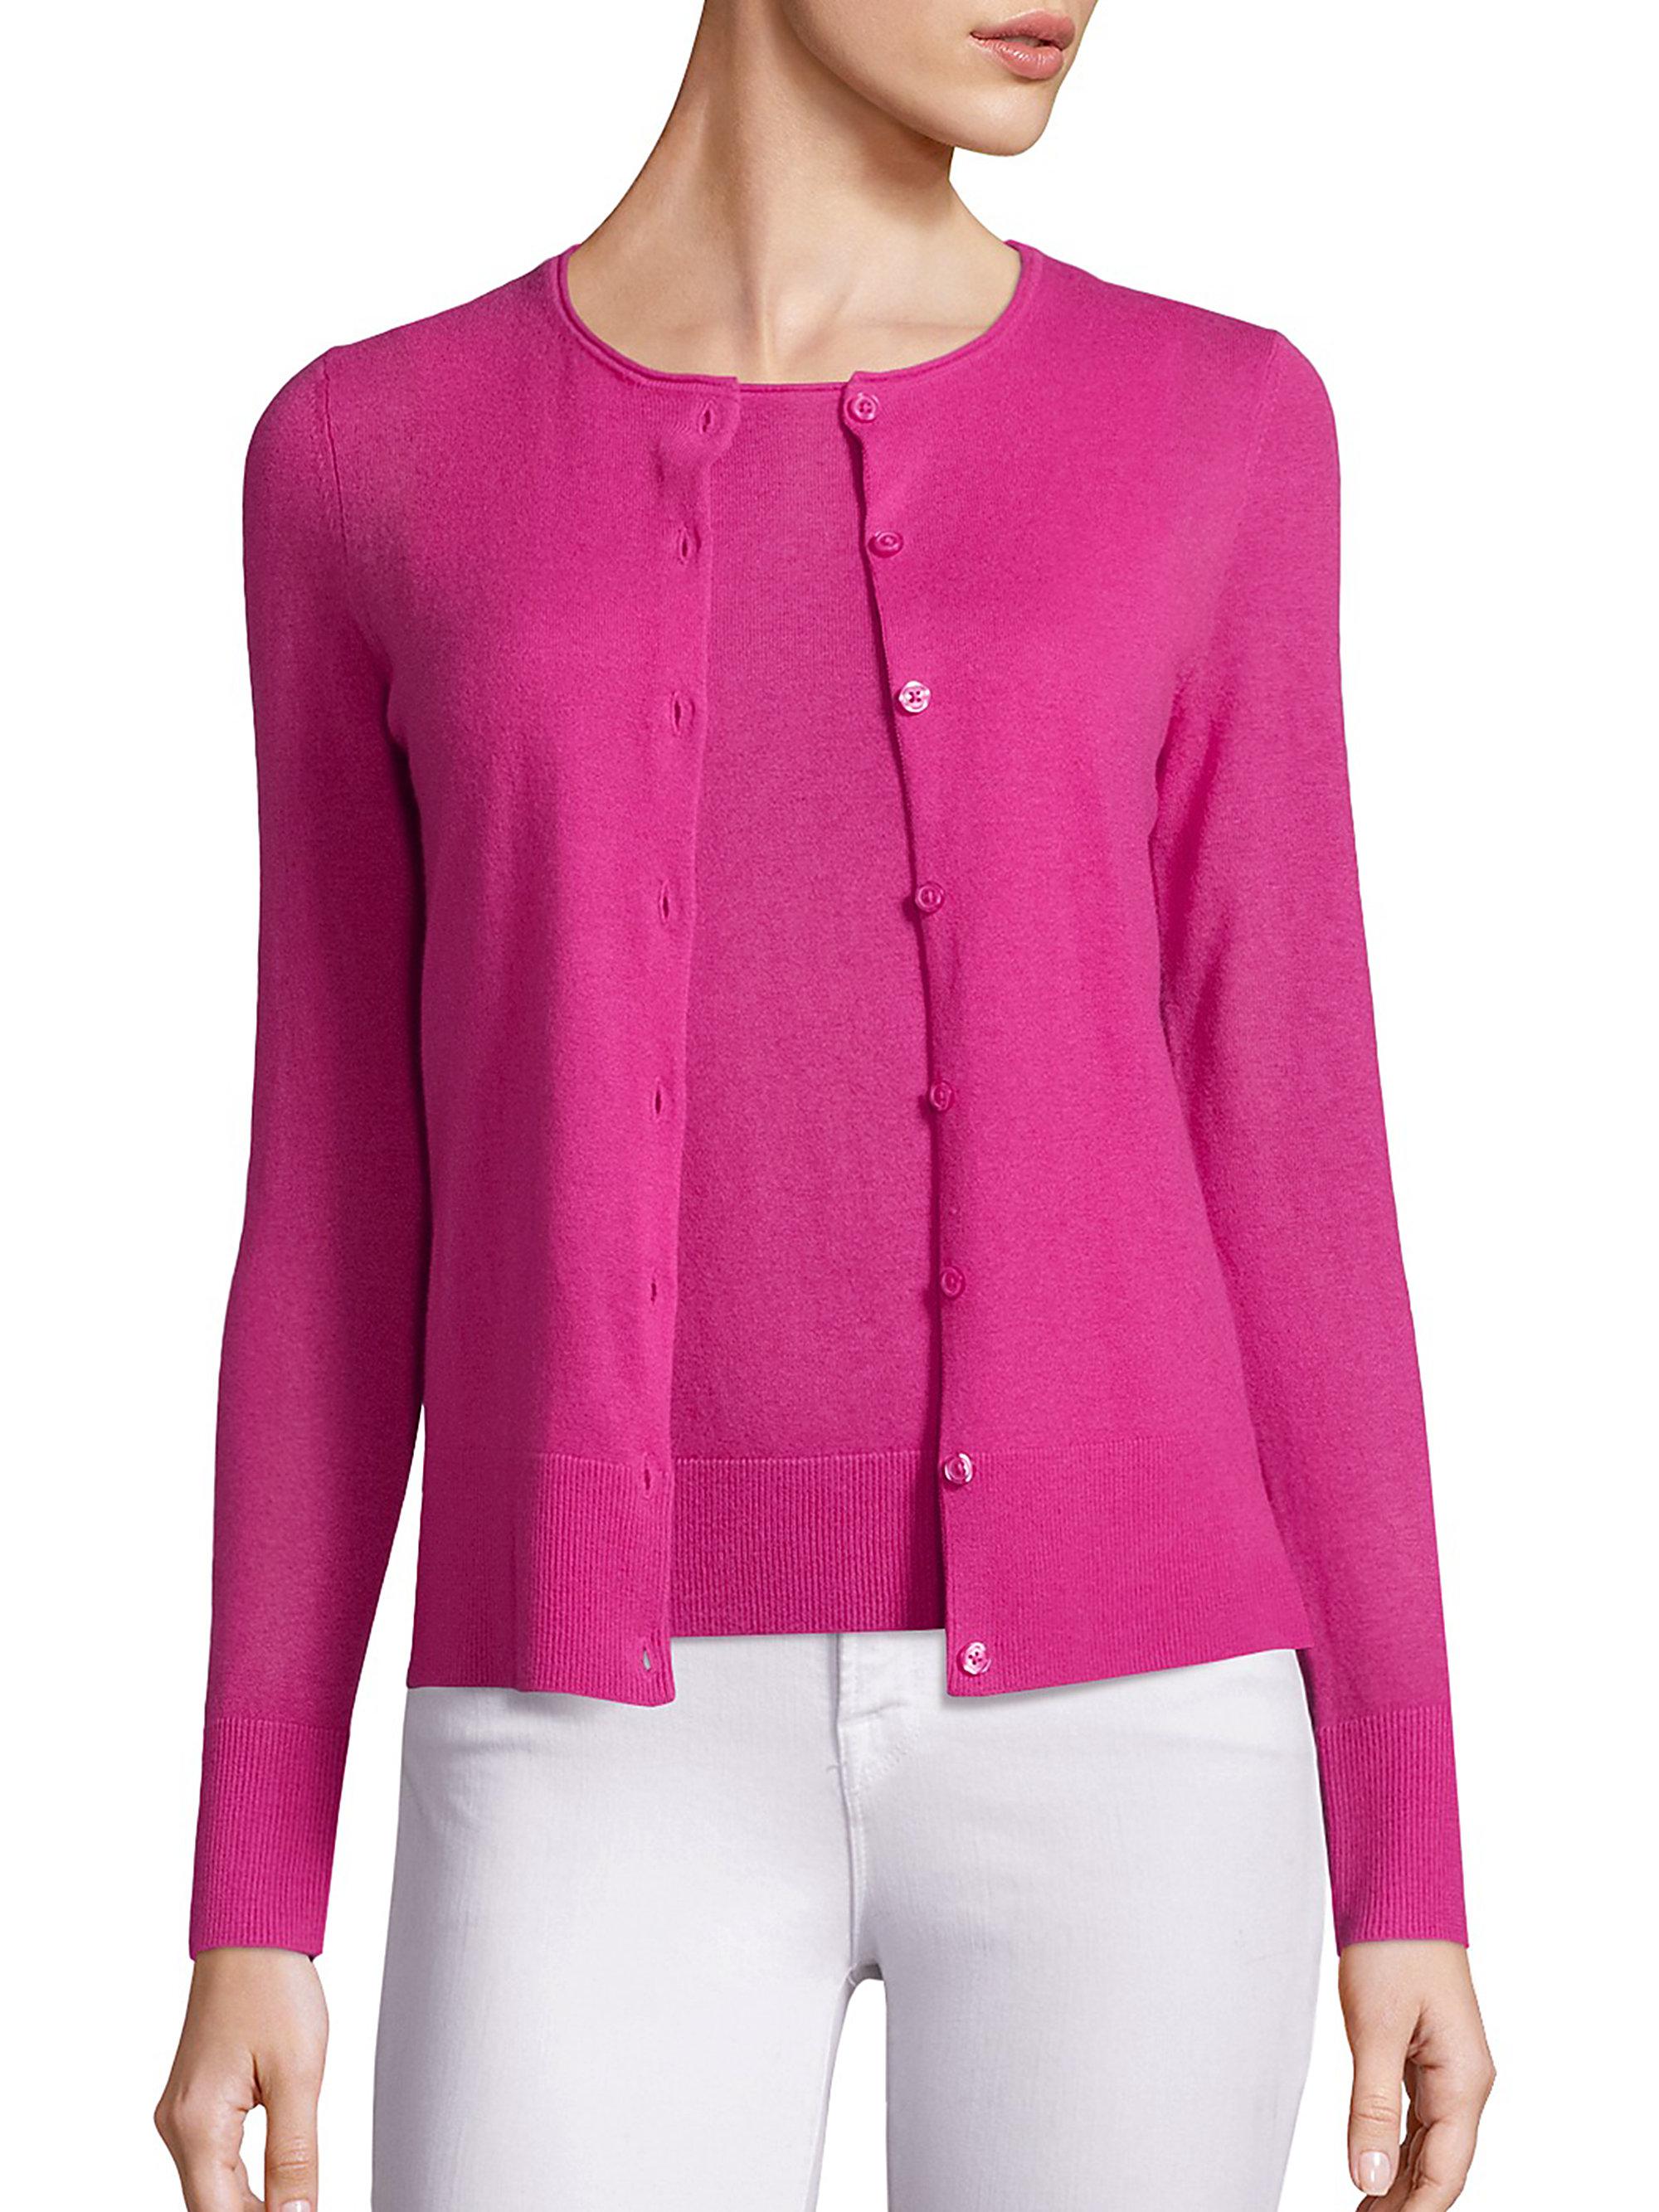 Lyst - Saks fifth avenue Lightweight Cashmere Cardigan in Pink